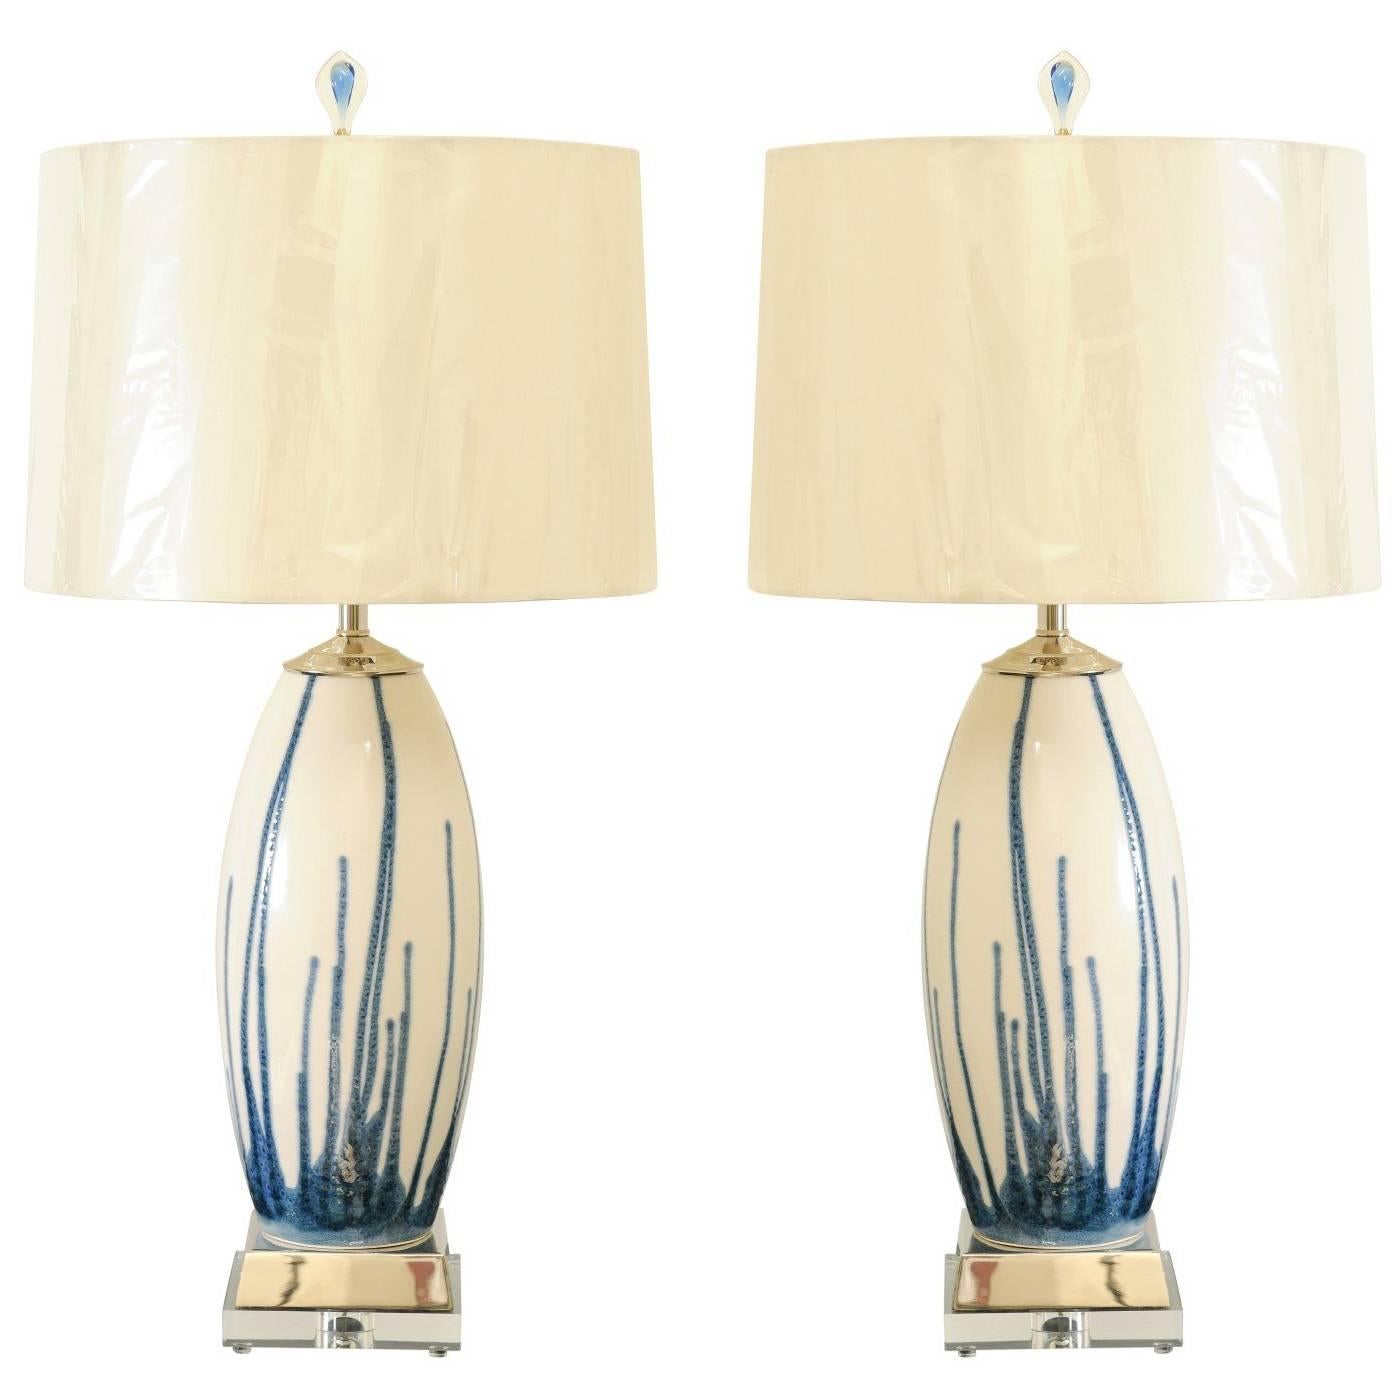 Lovely Pair of Custom-Made Portuguese Drip Ceramic Lamps in Blue and Cream